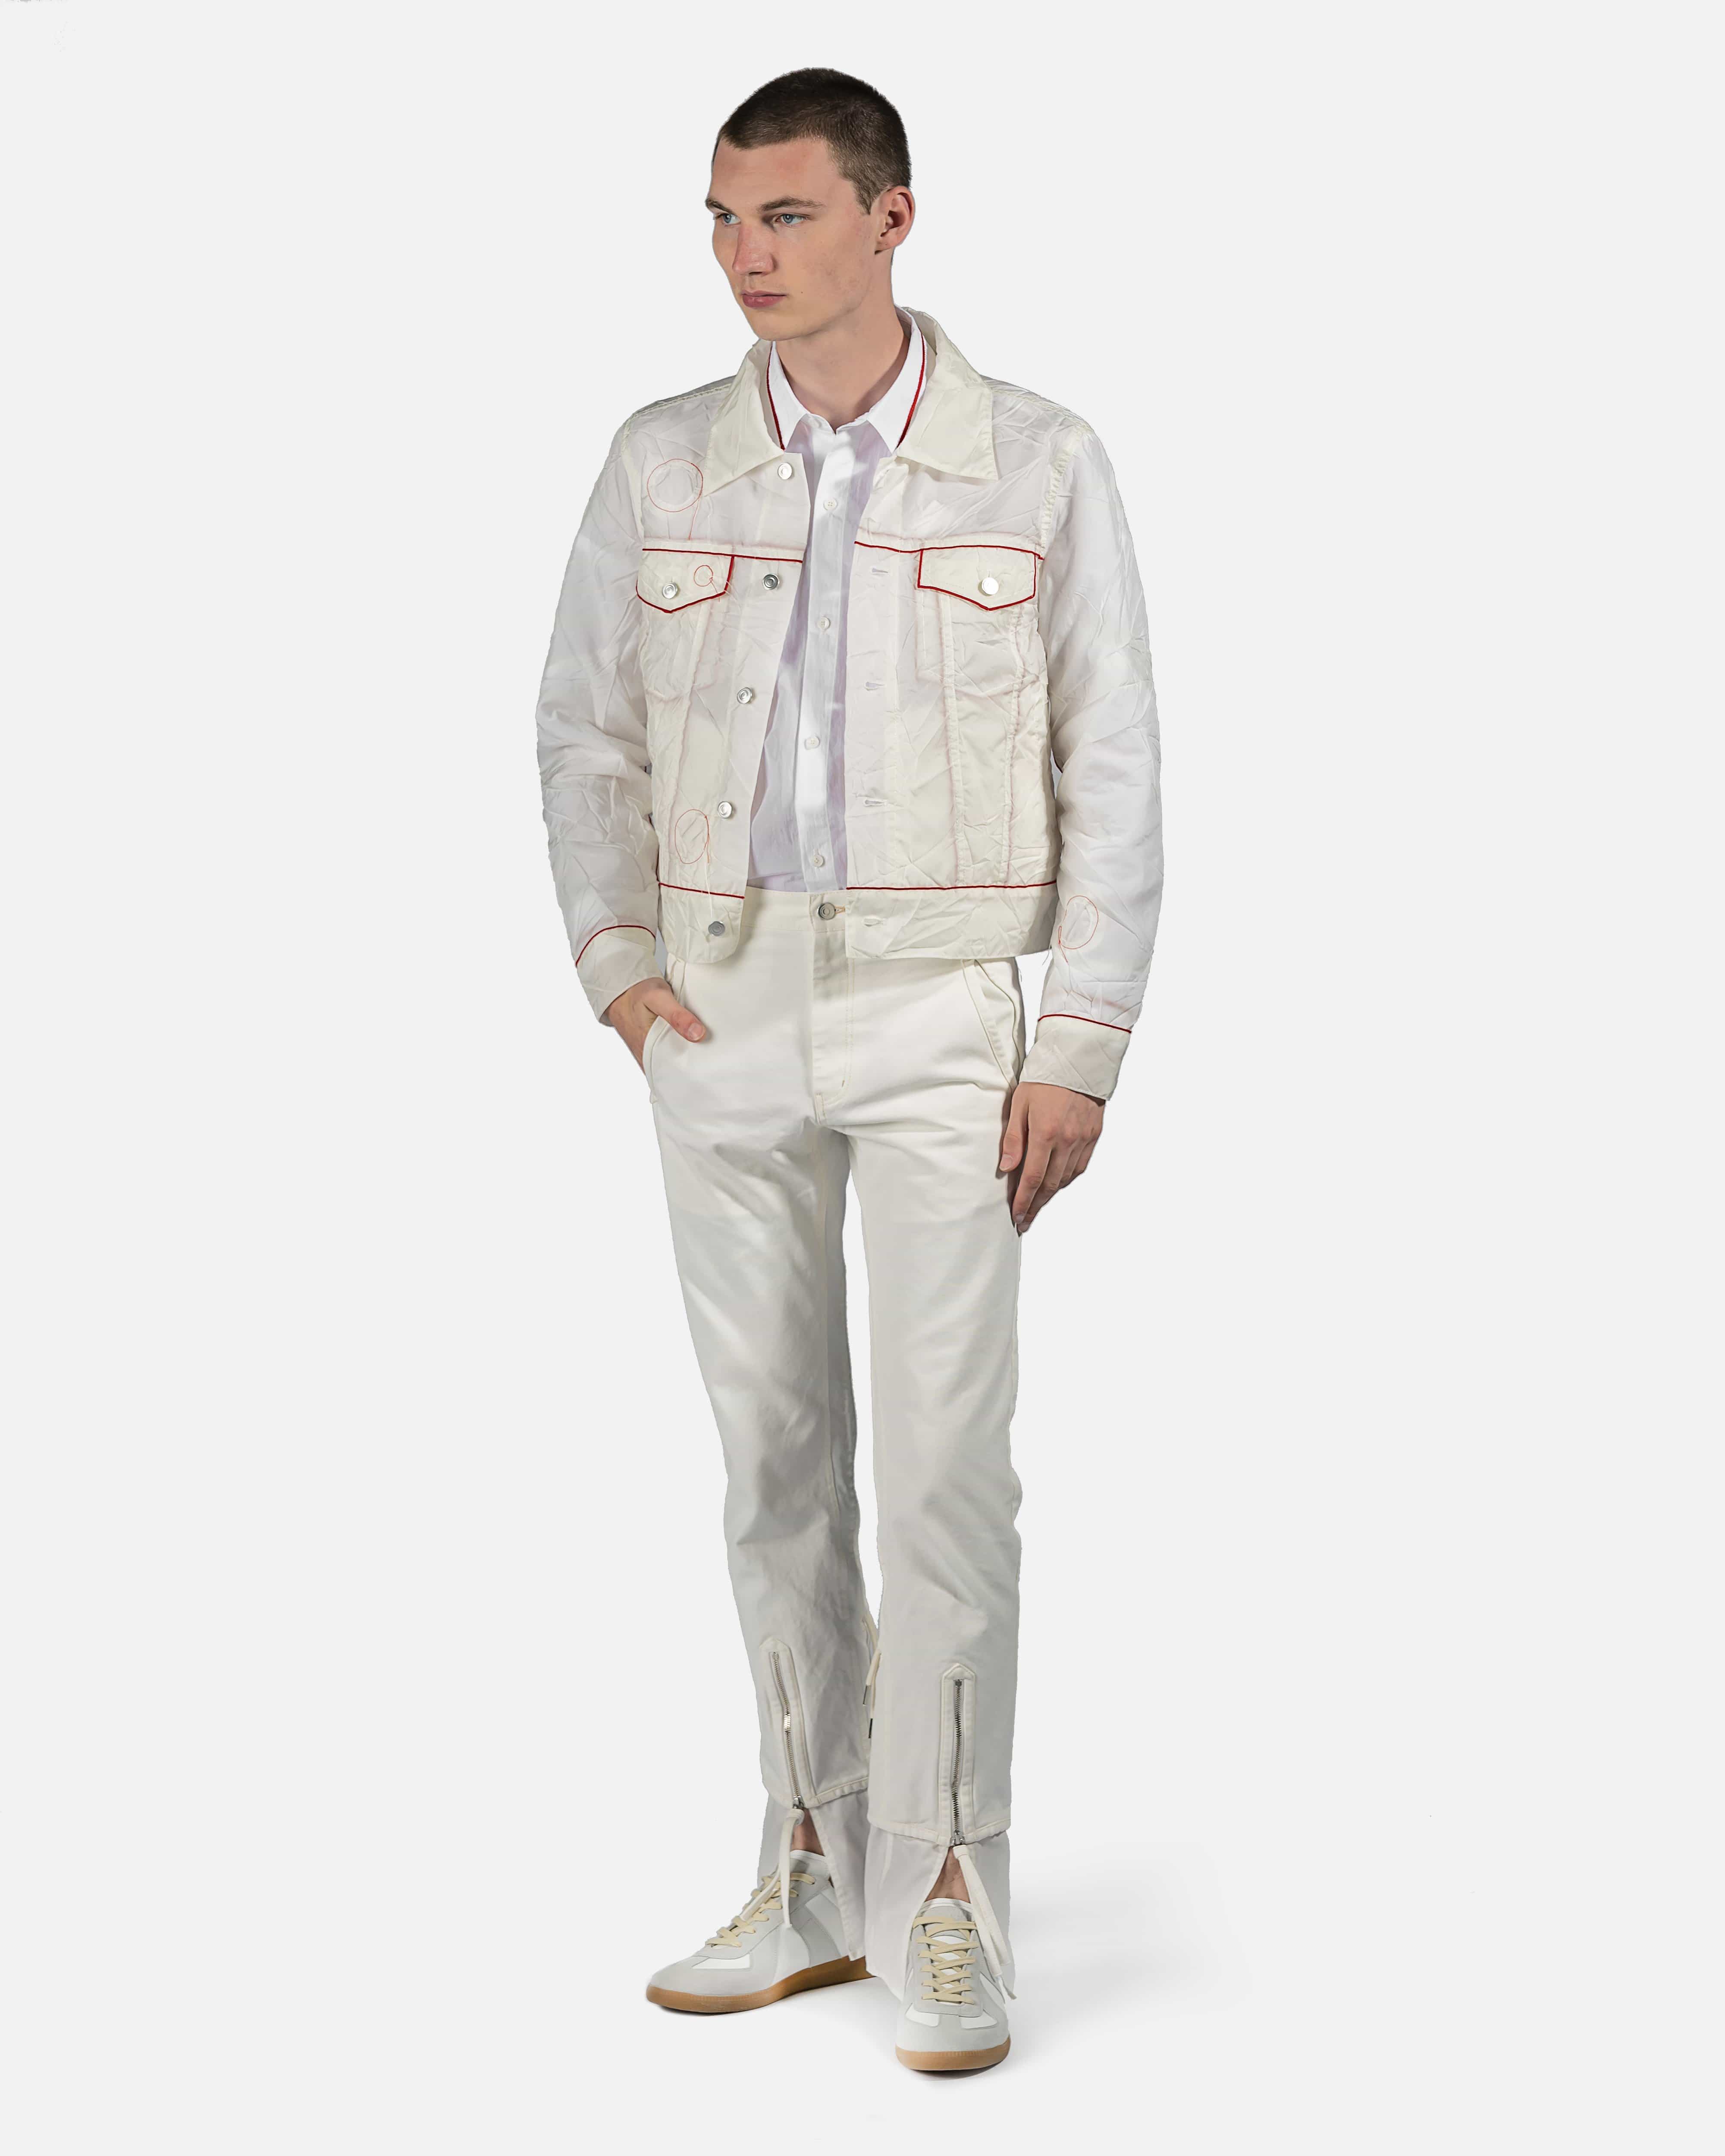 Airbag Trucker Jacket in White/Red